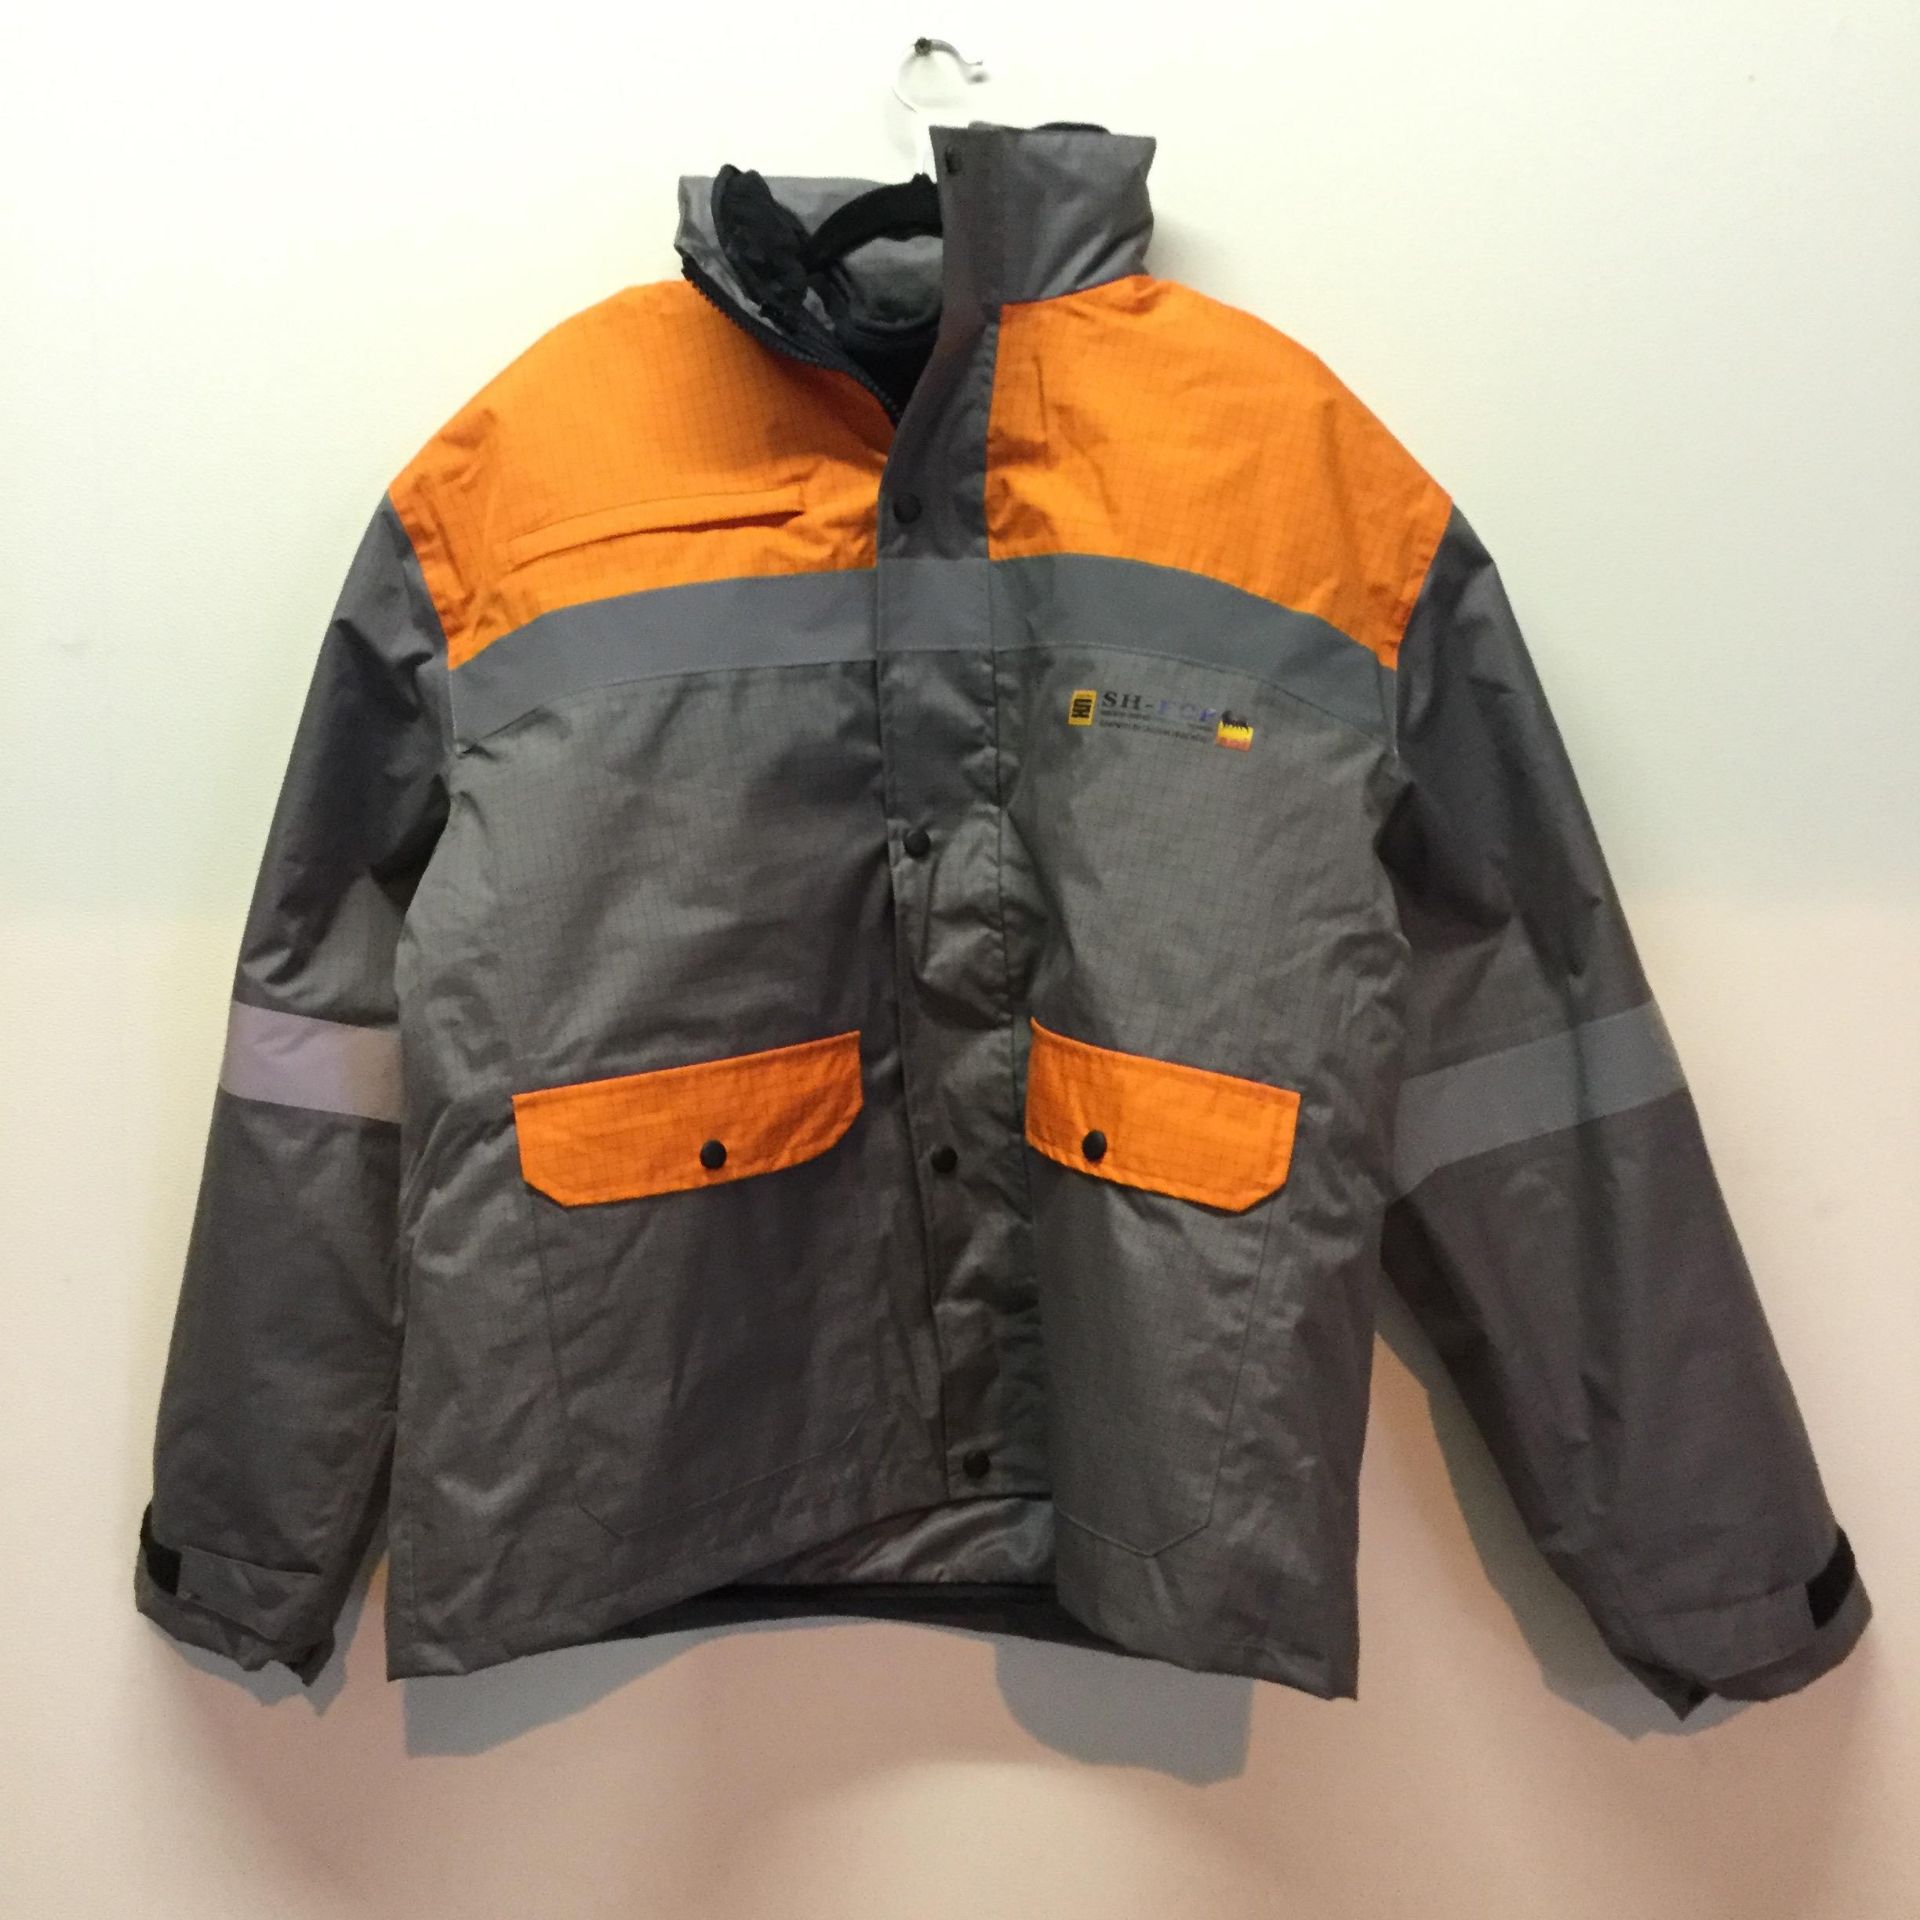 All Weather 3 layer Gortex Antistatic waterproof Jackets - Size 58